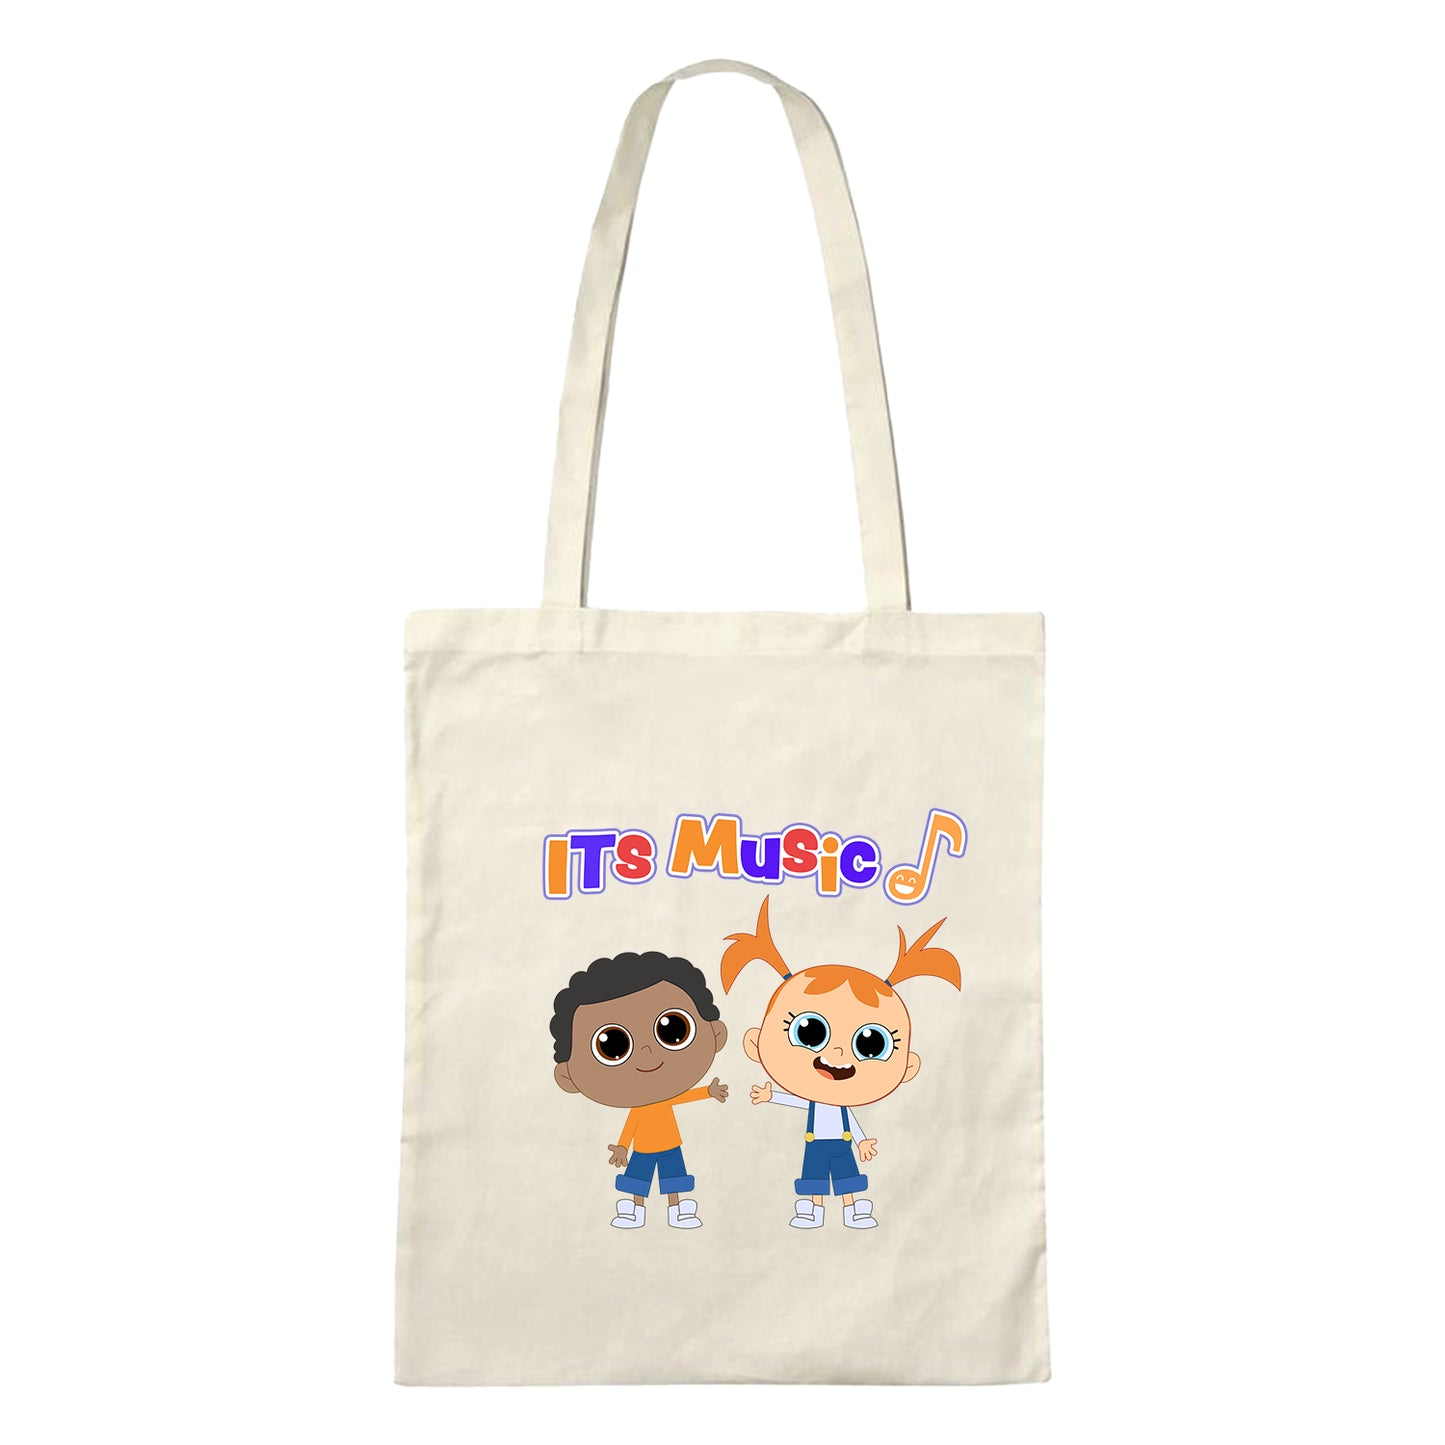 ITS Music Tote